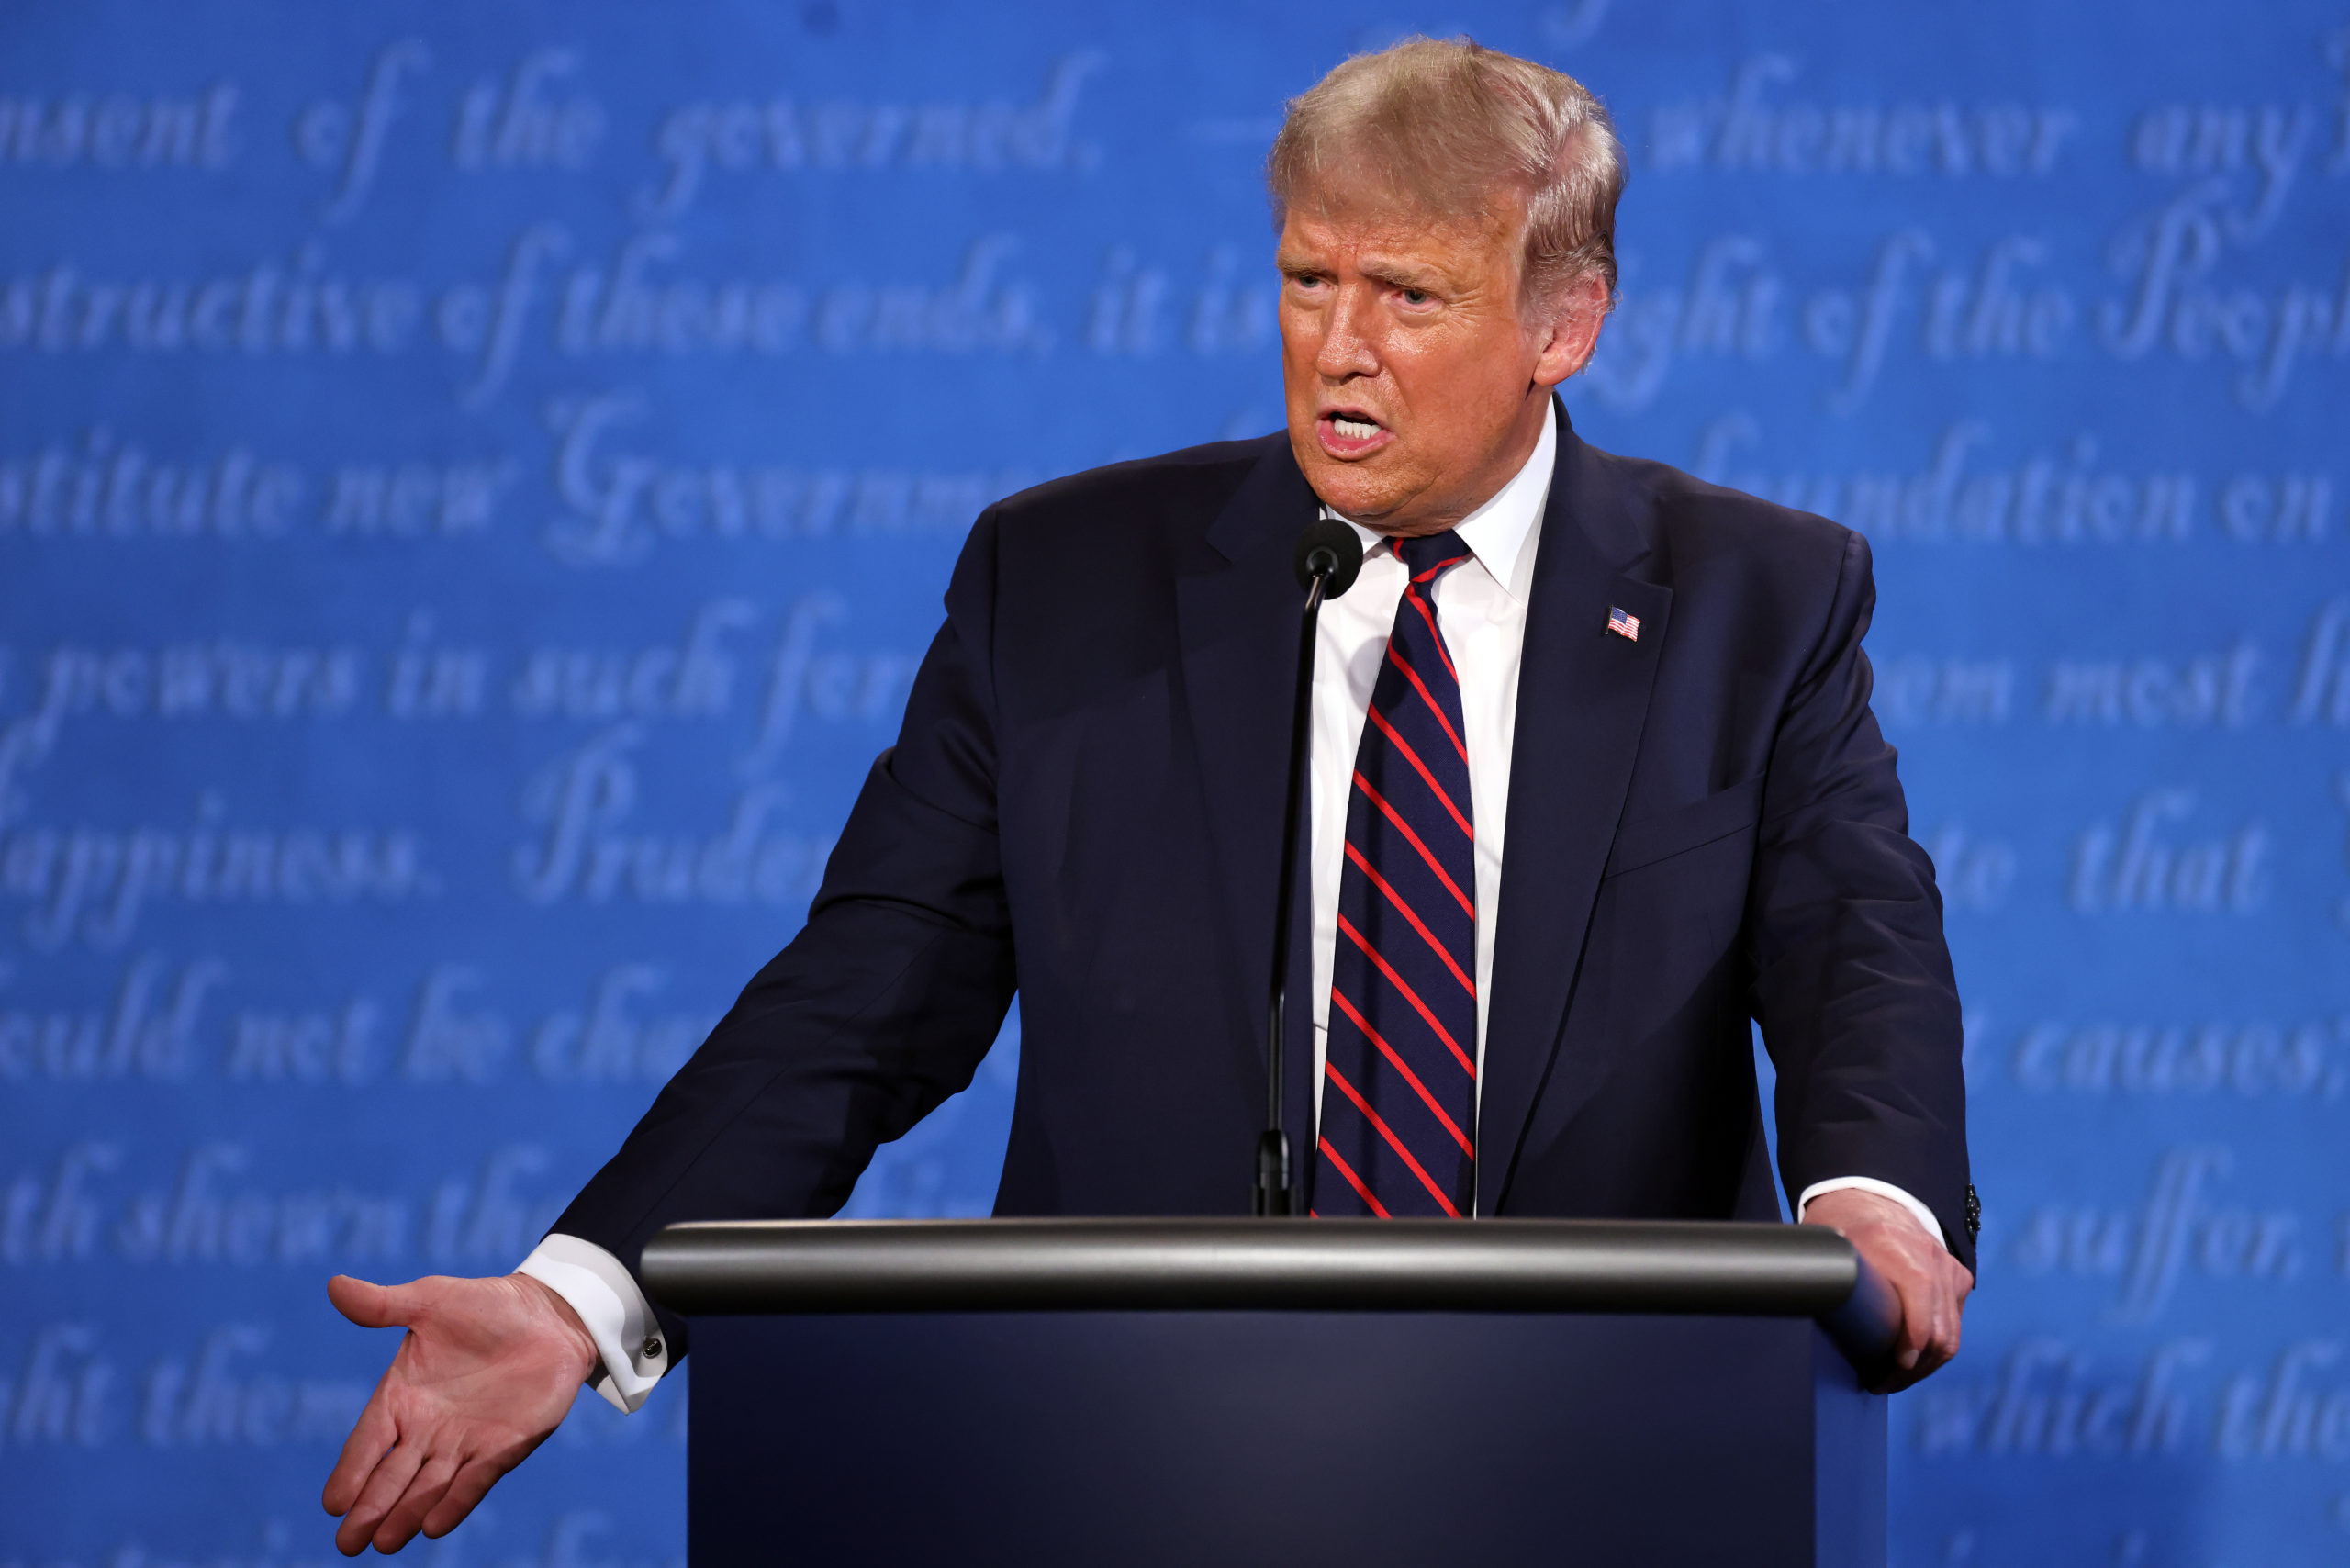 President Donald Trump participates in the first presidential debate against Democratic presidential nominee Joe Biden at the Health Education Campus of Case Western Reserve University on September 29, 2020 in Cleveland, Ohio. (Win McNamee/Getty Images)